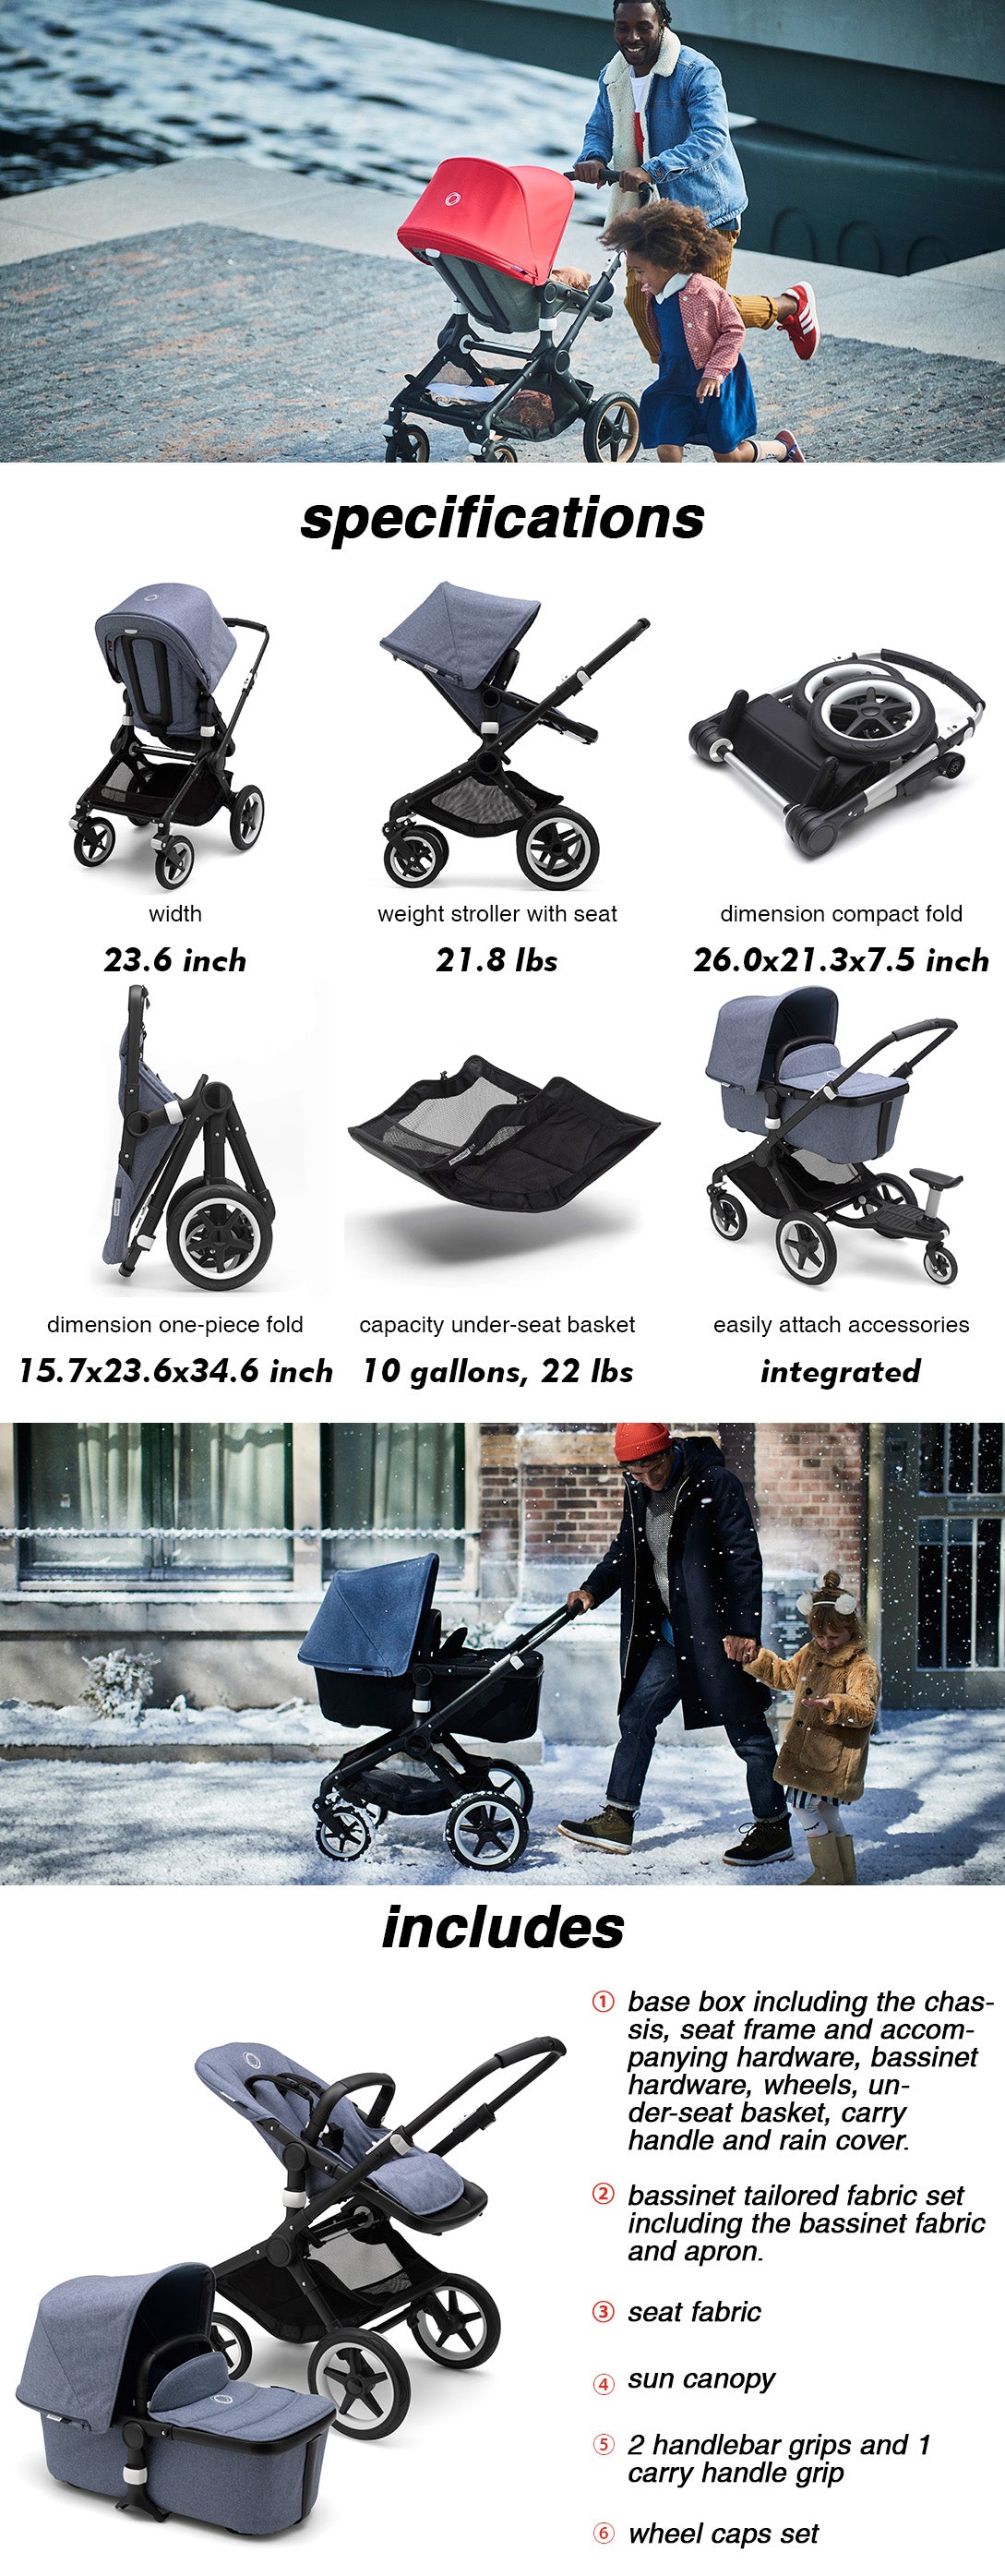 bugaboo cameleon 3 max weight